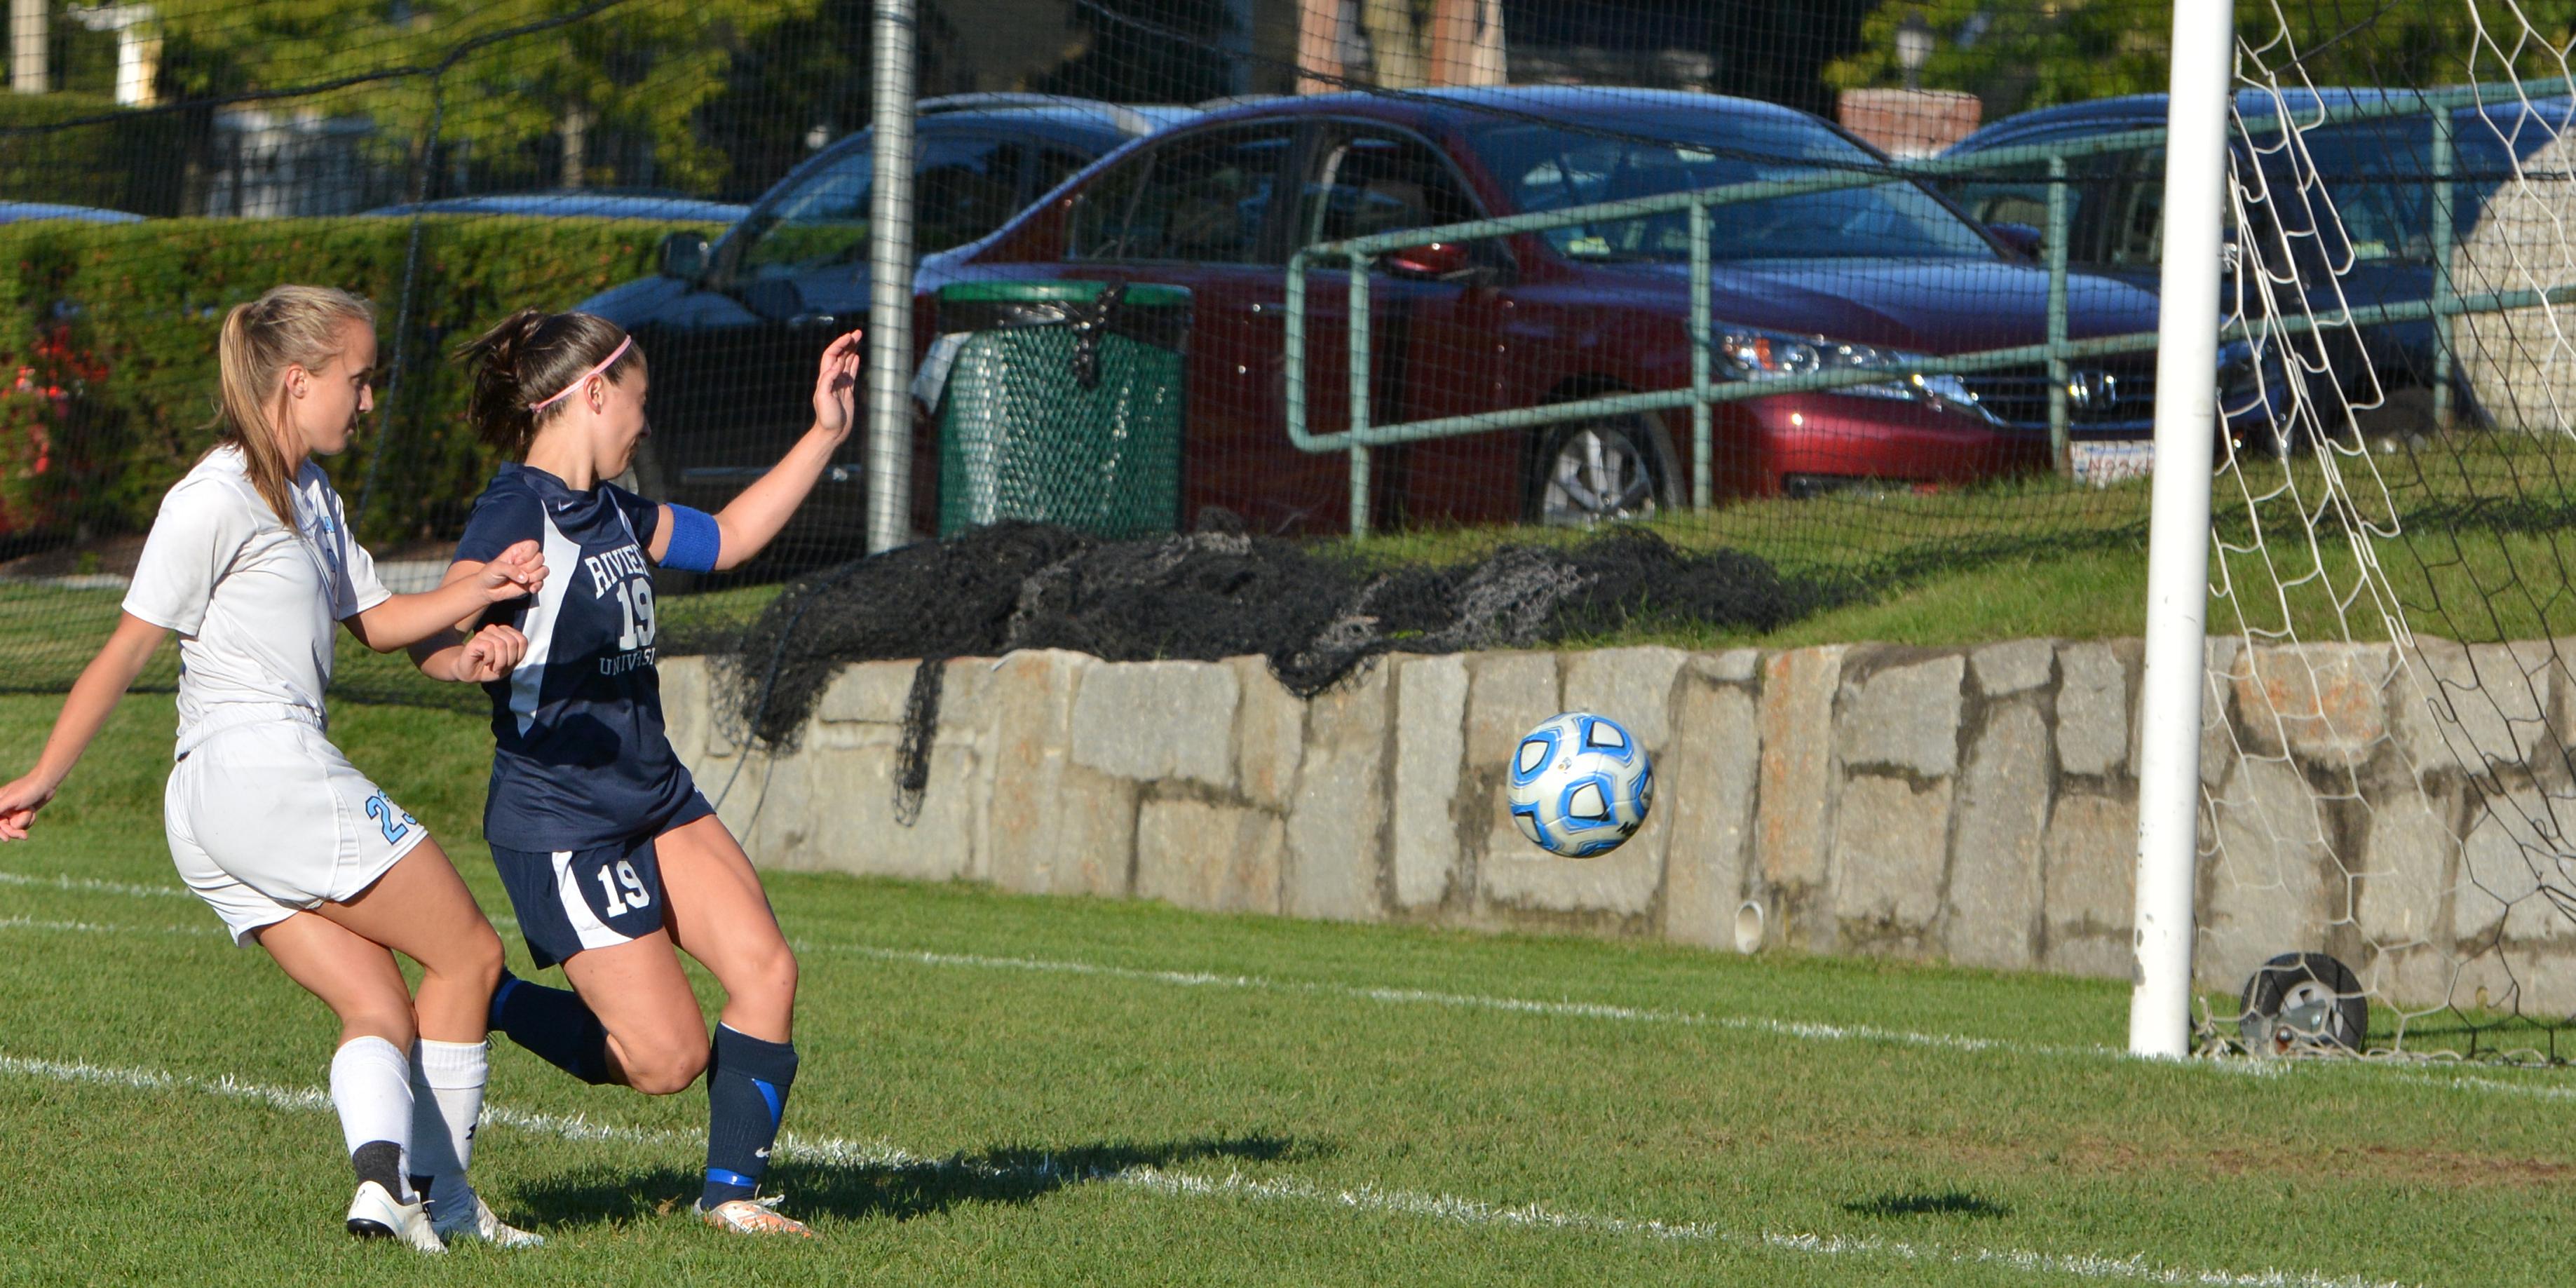 Women's Soccer Tops Emmanuel, 2-0 on Saturday afternoon